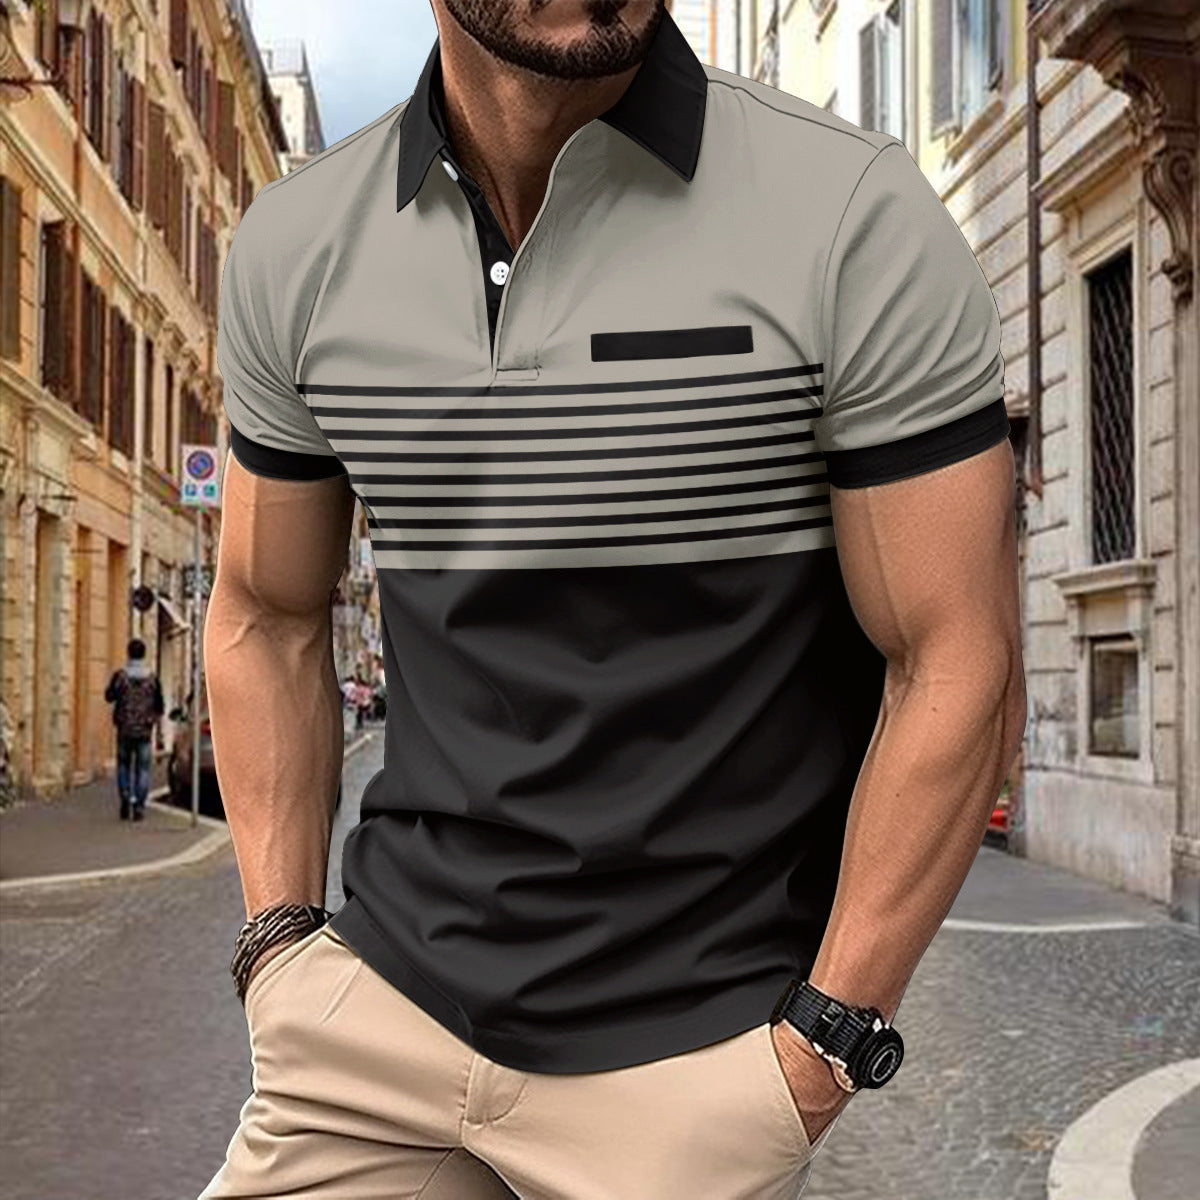 Men's Casual Shirt With Chest Pocket